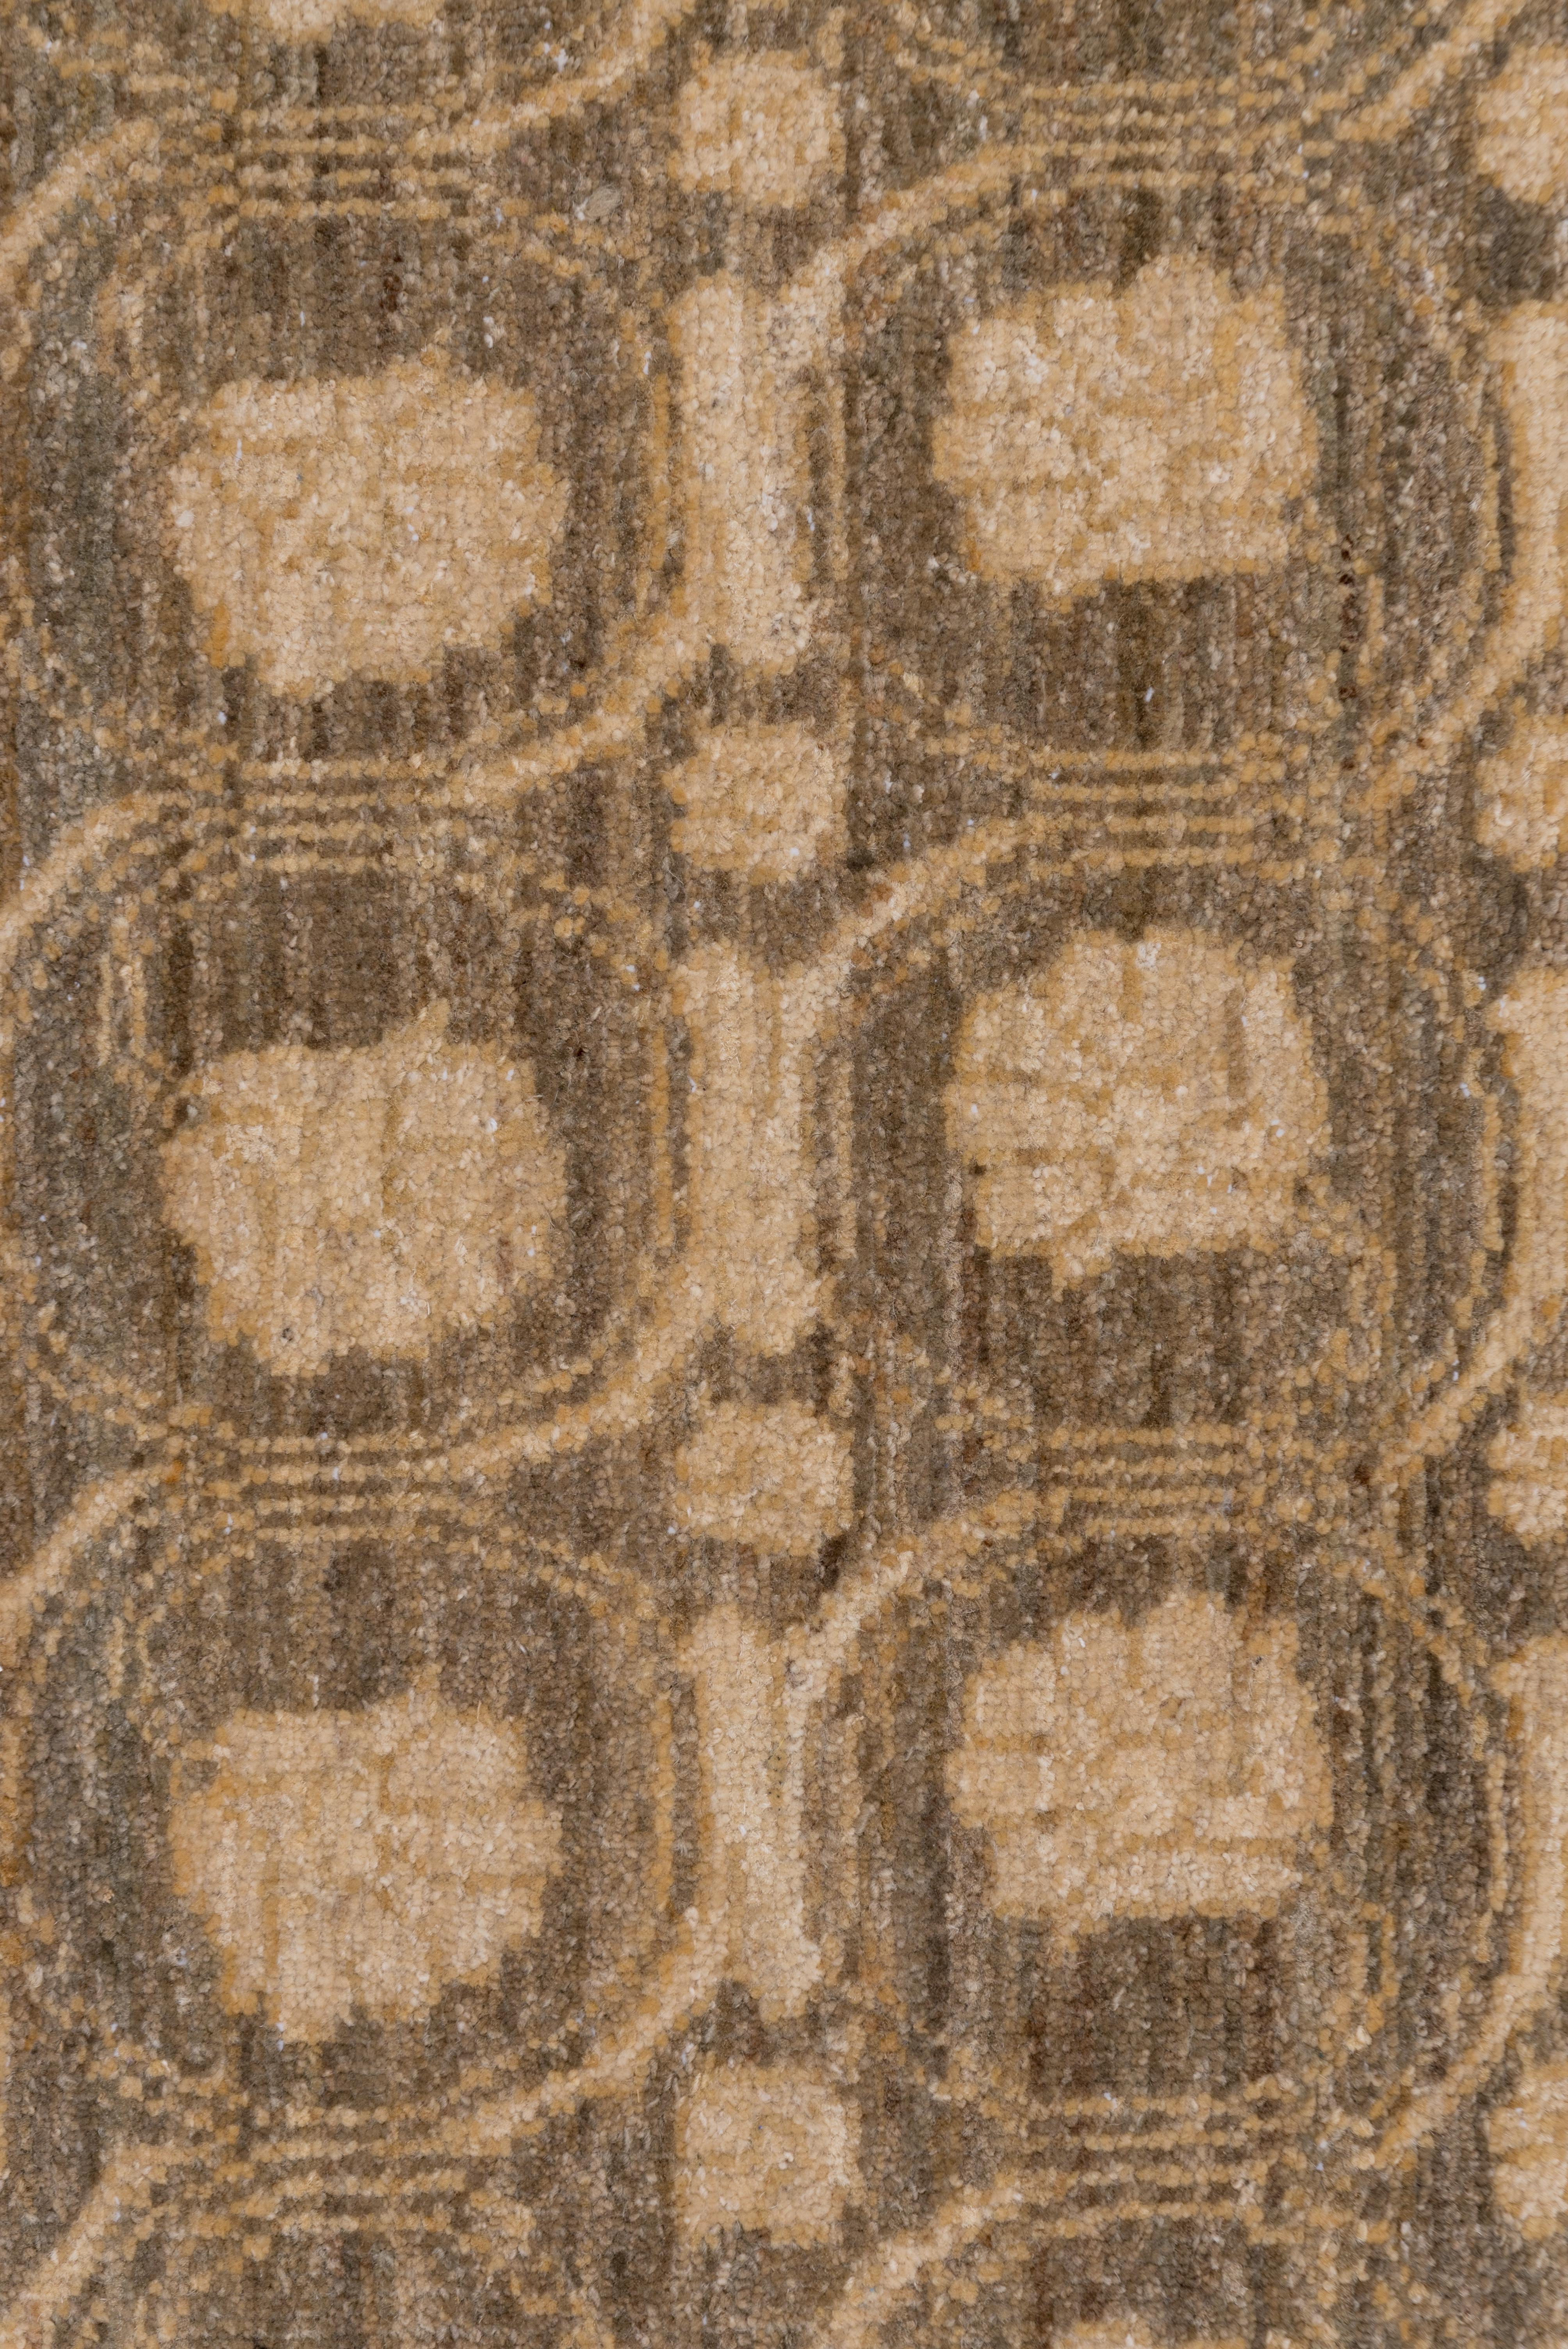 No borders, but row and rows, columns and columns of rounded stems enclosing flowers in beige and goldenrod, on the densely abrashed sienna ground on this Afghan origin Sivas-style carpet. Between are small rosettes and short connecting bars. Easily